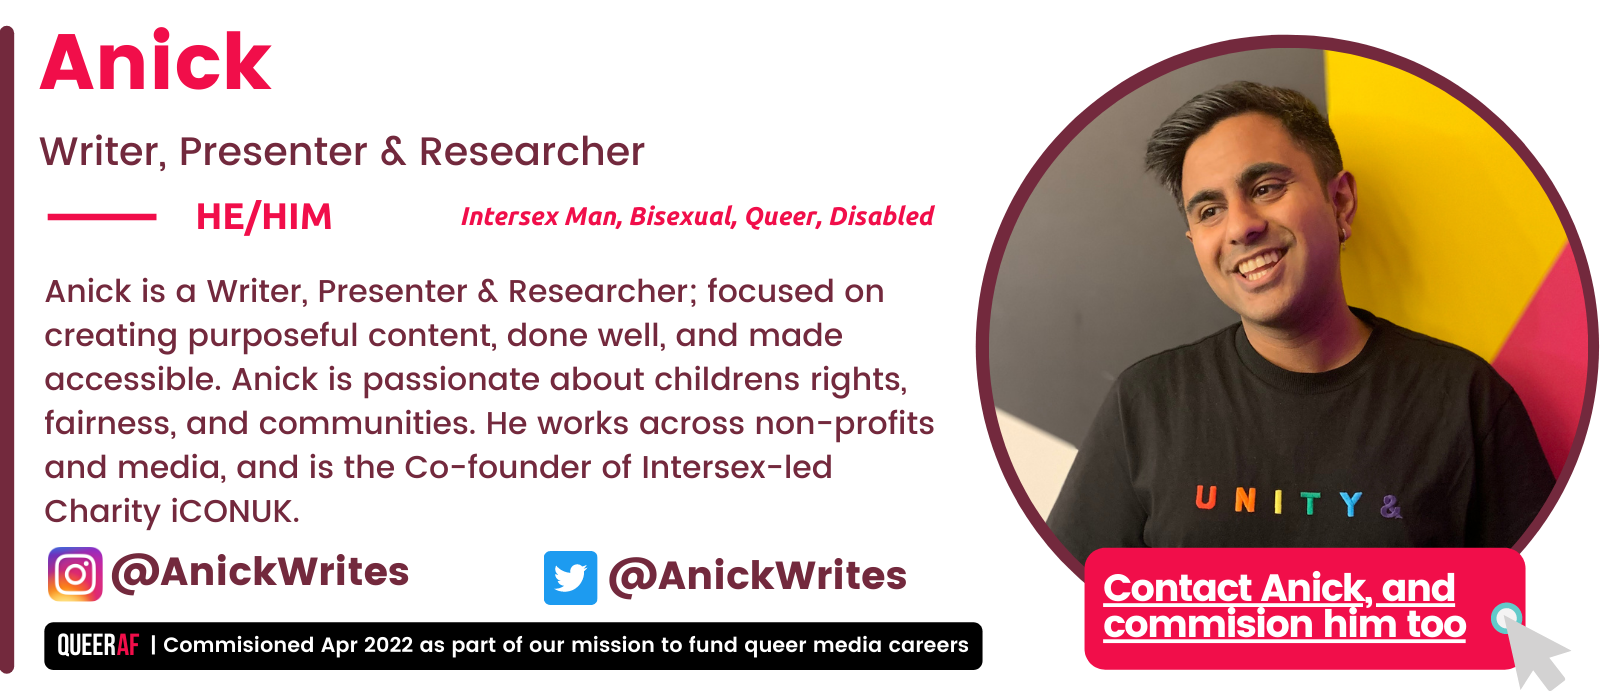   | Commisioned Apr 2022 as part of our mission to fund queer media careers Queer AF @AnickWrites @AnickWrites Contact Anick, and commision him too  Anick is a Writer, Presenter & Researcher; focused on creating purposeful content, done well, and made accessible. Anick is passionate about childrens rights, fairness, and communities. He works across non-profits and media, and is the Co-founder of Intersex-led Charity iCONUK.   HE/Him Intersex Man, Bisexual, Queer, Disabled  Anick Writer, Presenter & Researcher